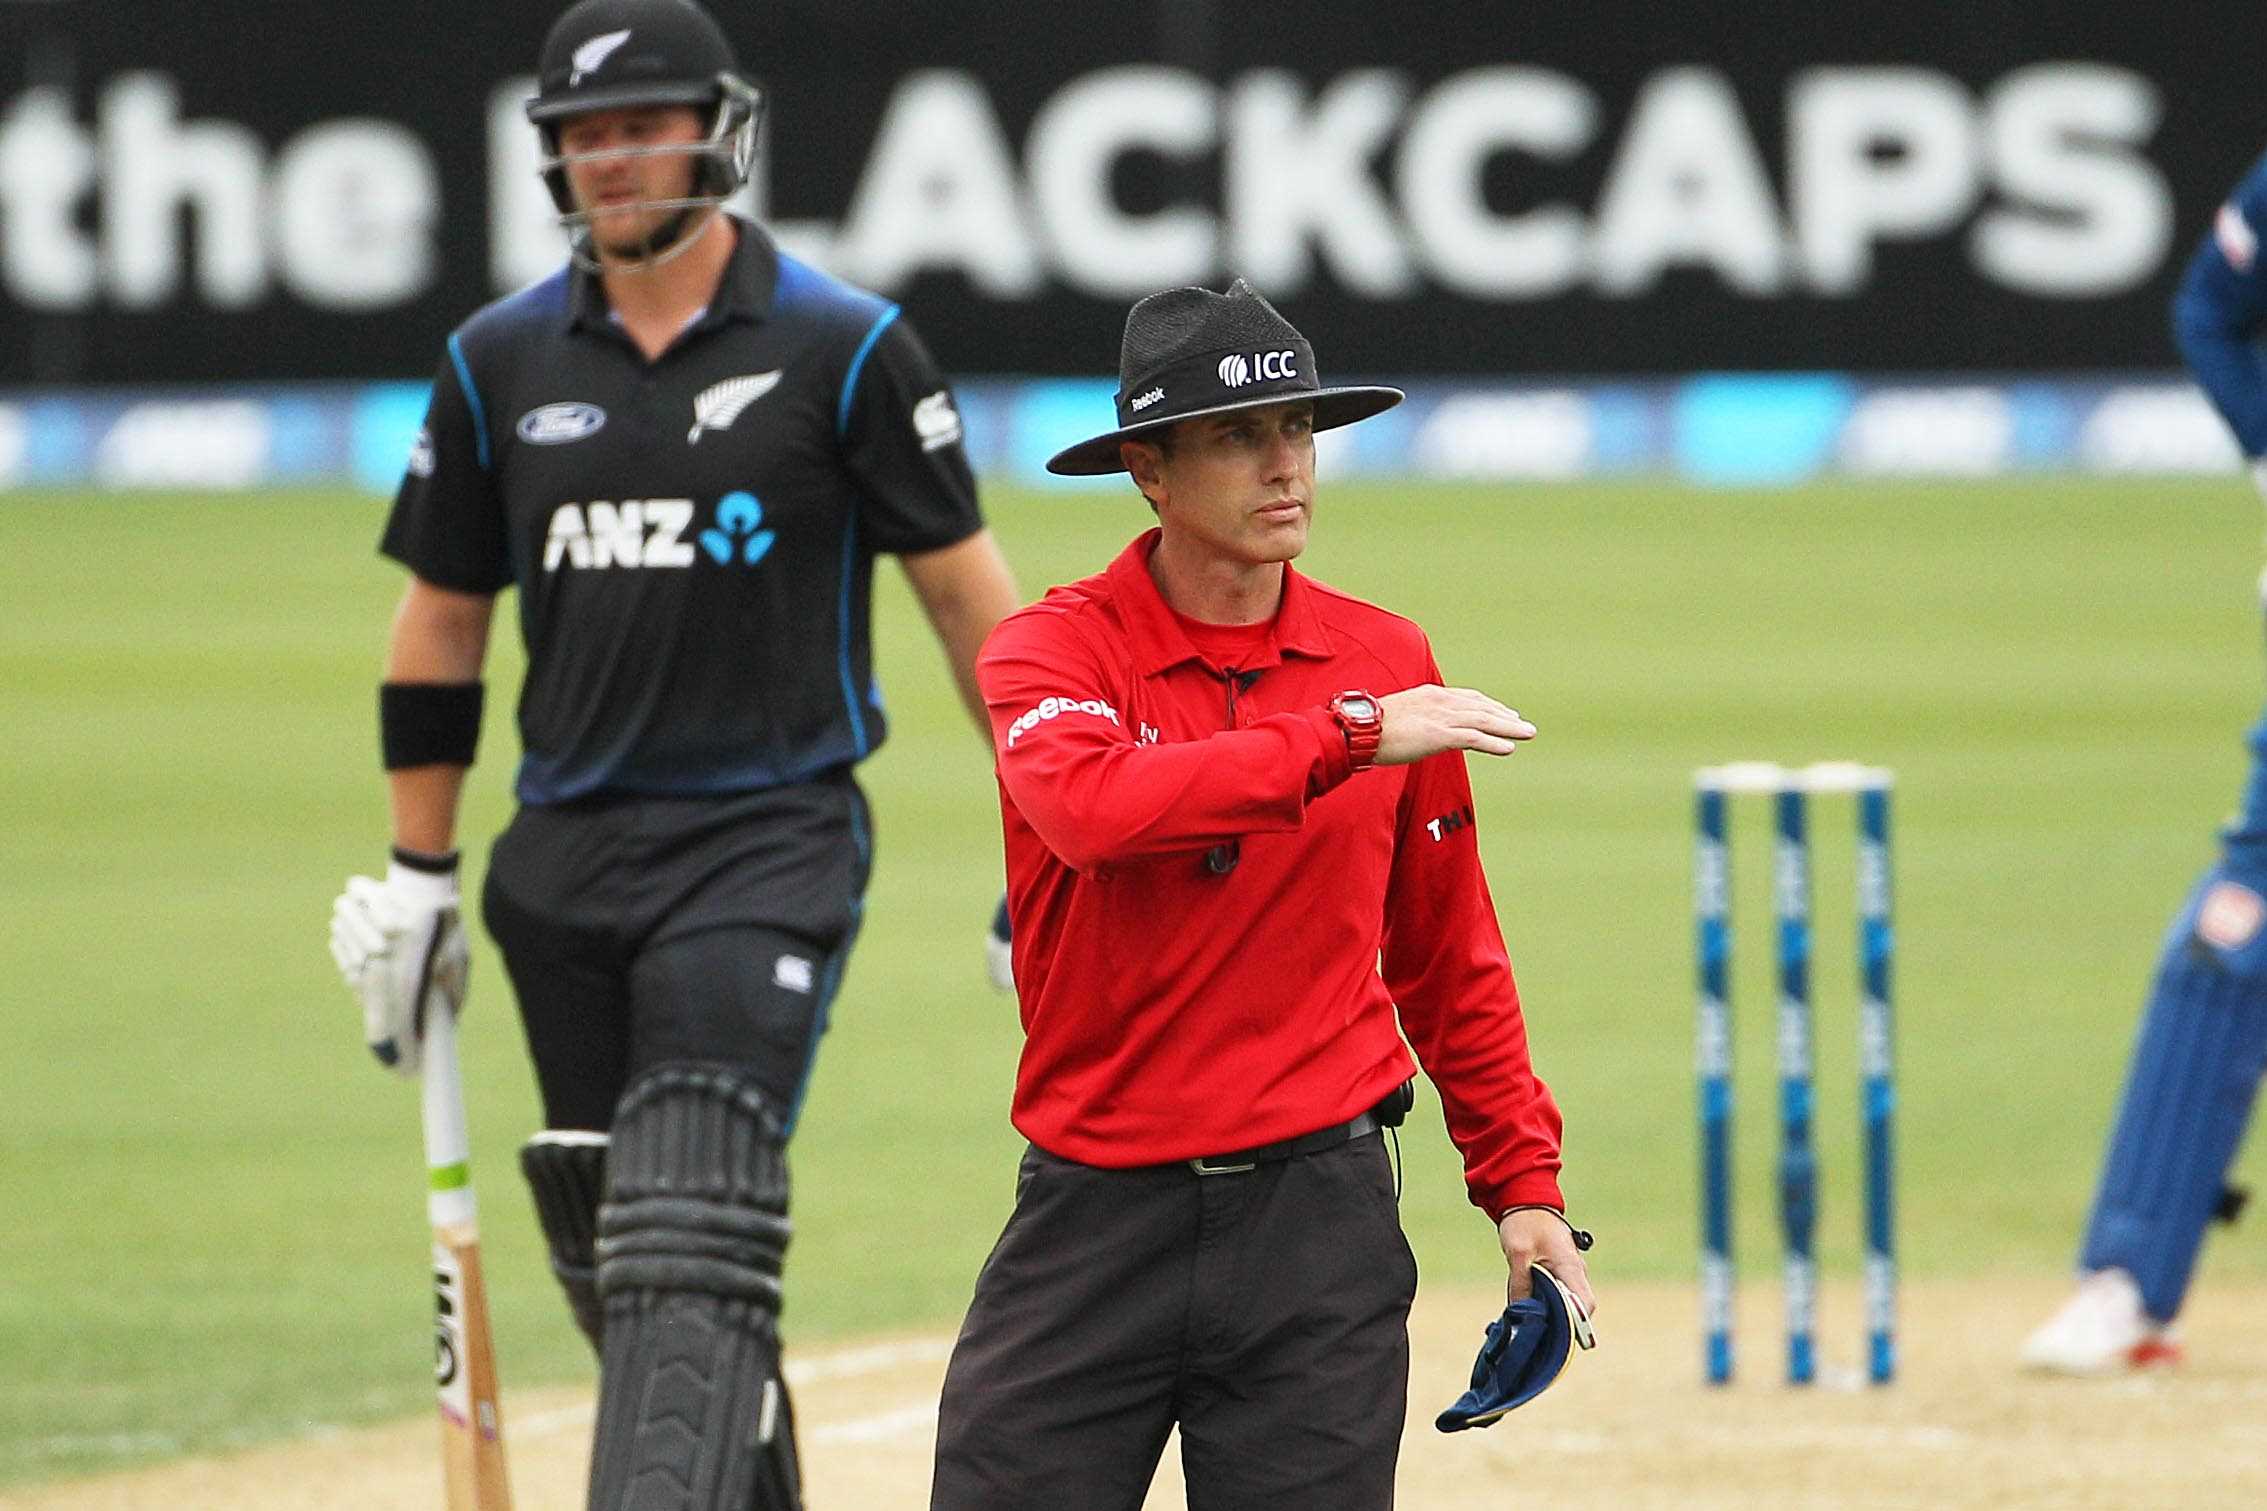 Umpire Chris Gaffaney signals a four off the bat of Corey Anderson of the Black Caps during the first ODI cricket game between the Black Caps v Sri Lanka at Hagley Oval, Christchurch. 11 January 2015 Photo: Joseph Johnson / www.photosport.co.nz